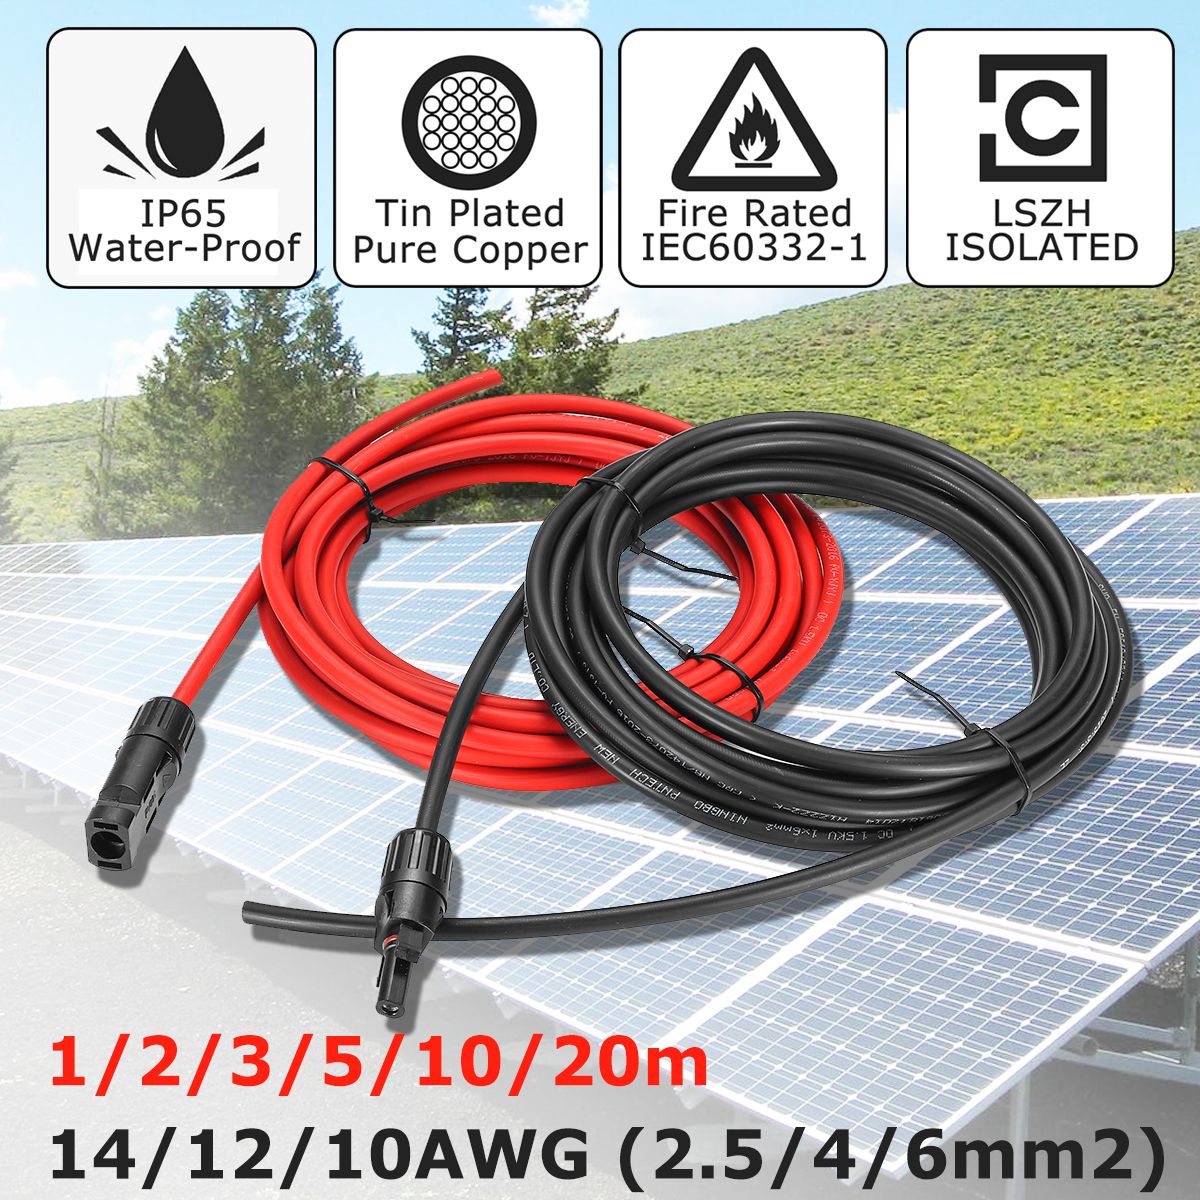 33A--1235M-25mmsup2-14AWG-Eternal-53mm-Solar-Panel-Extension-Cable-Wire-MC4-Connector-Copper-Wire-So-1479415